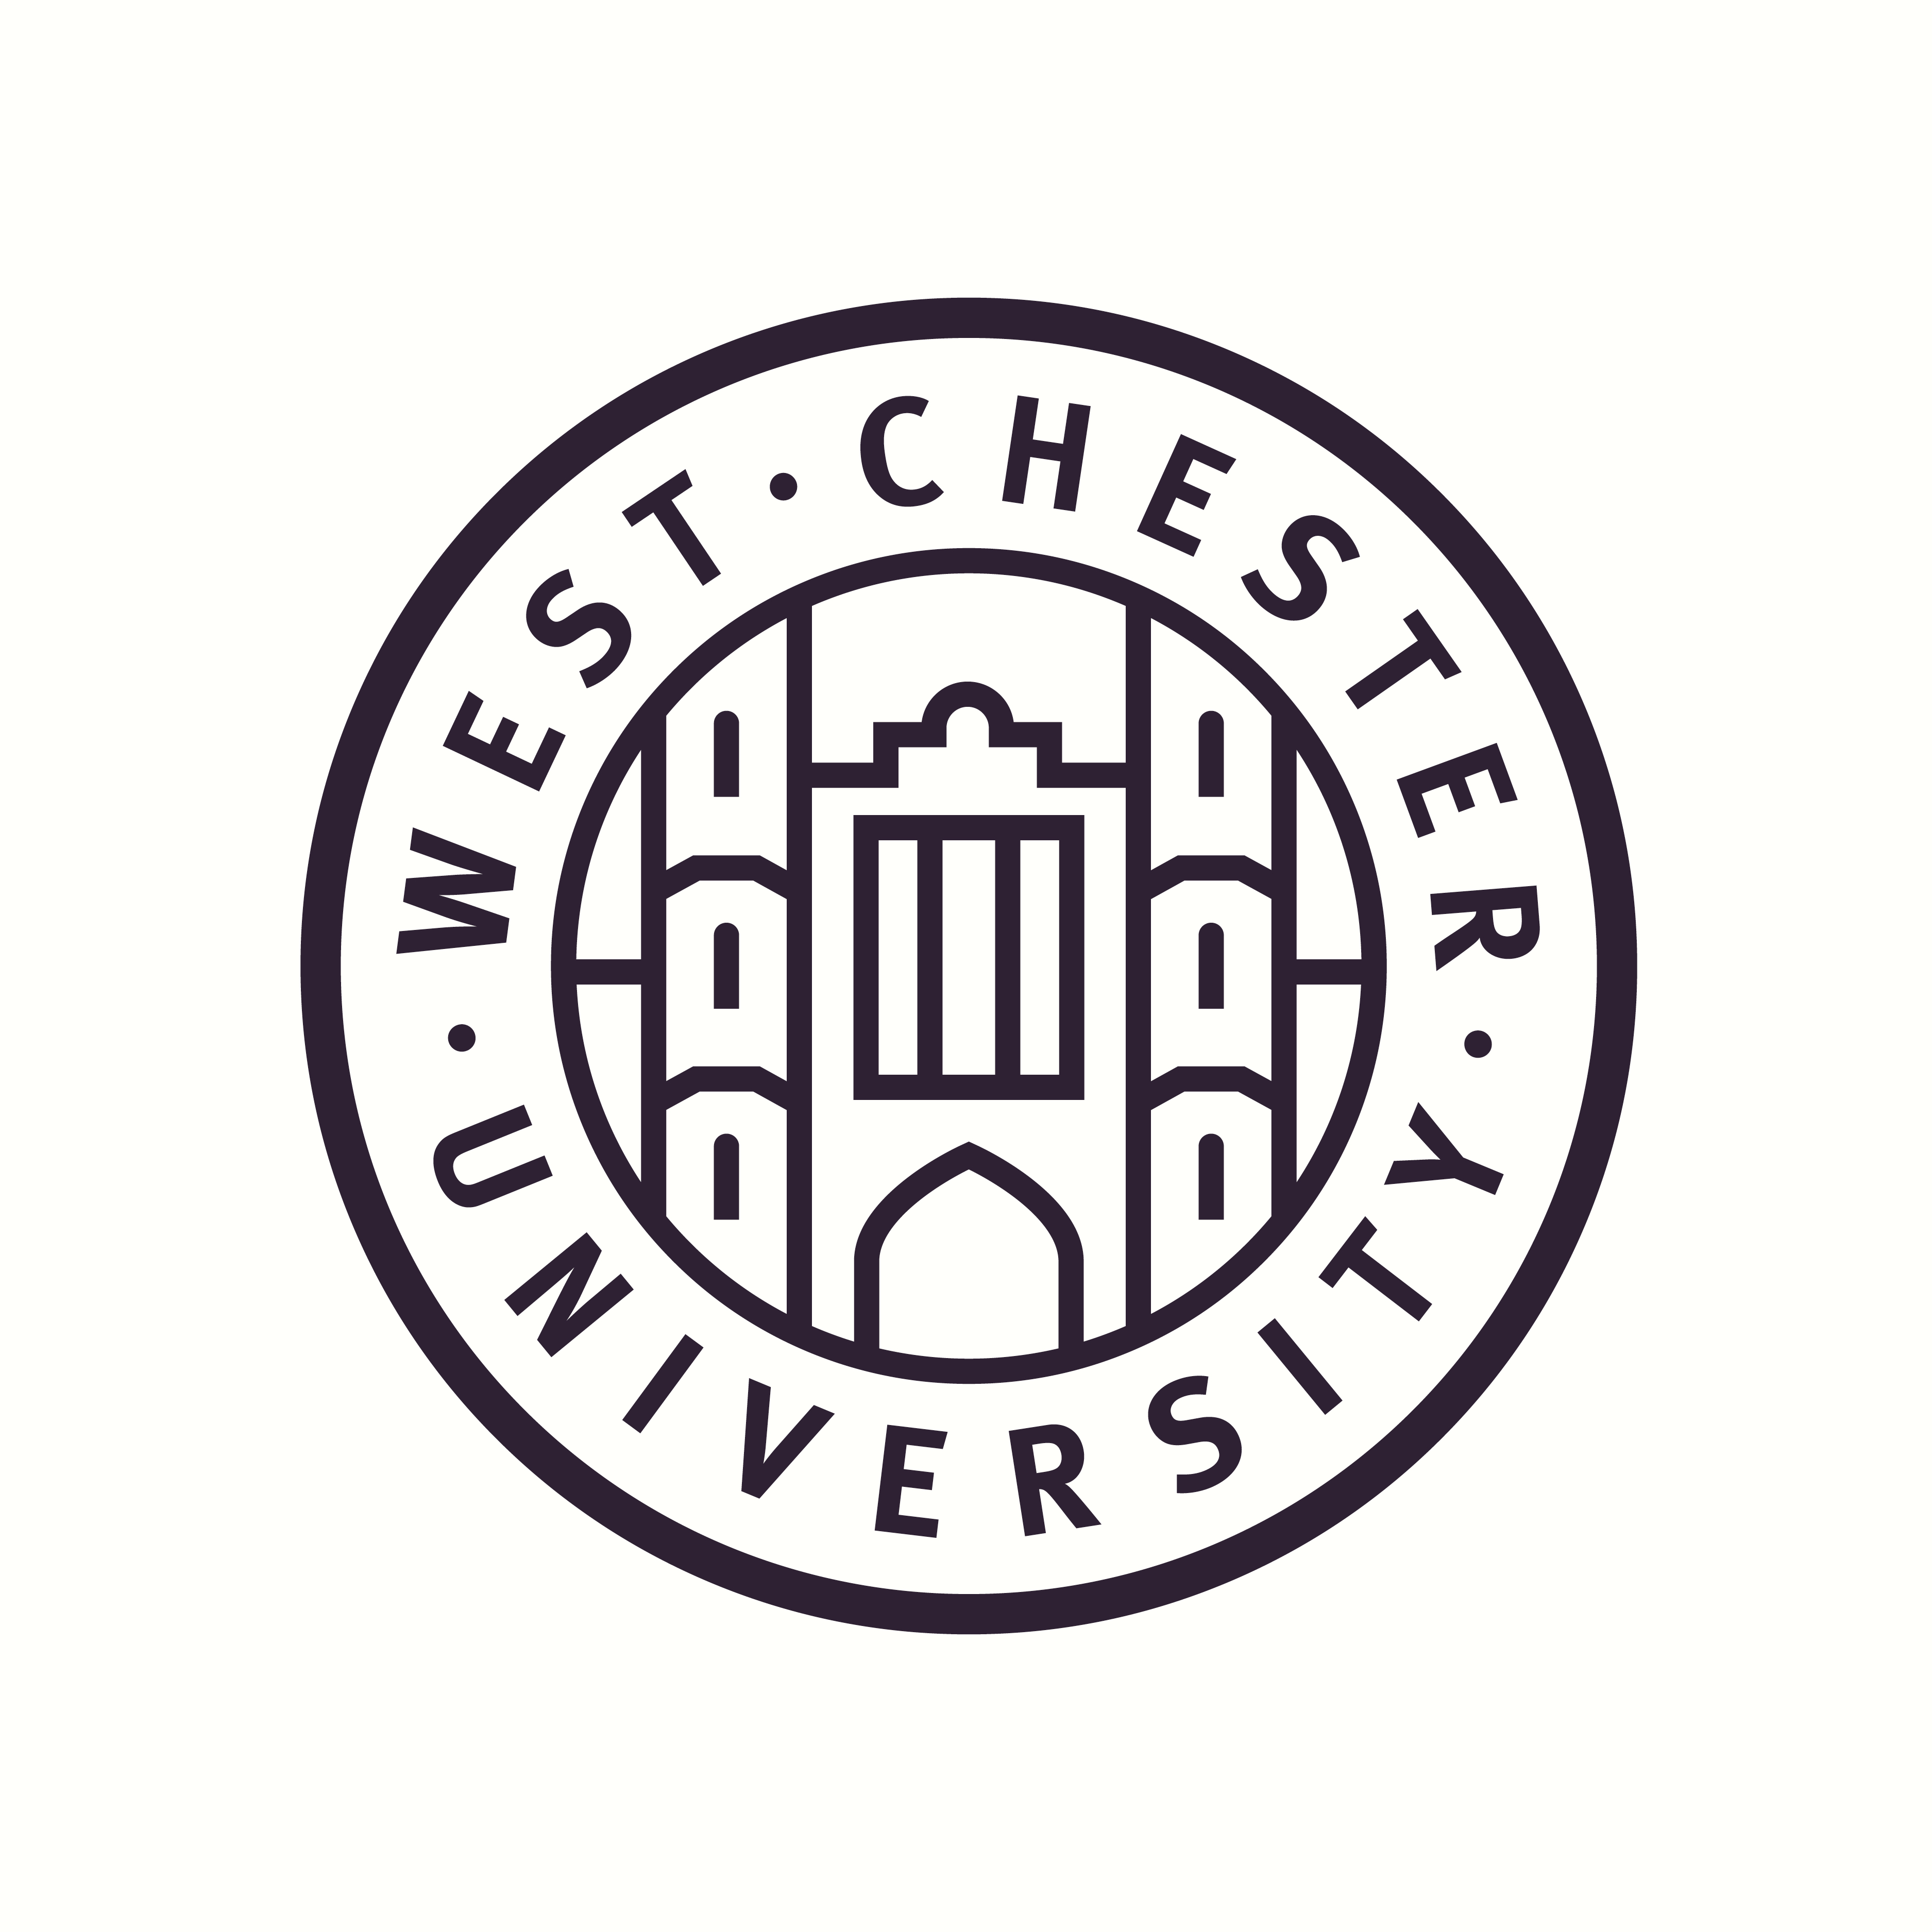 West Chester University of Pennsylvania logo design by logo designer dpljones design for your inspiration and for the worlds largest logo competition